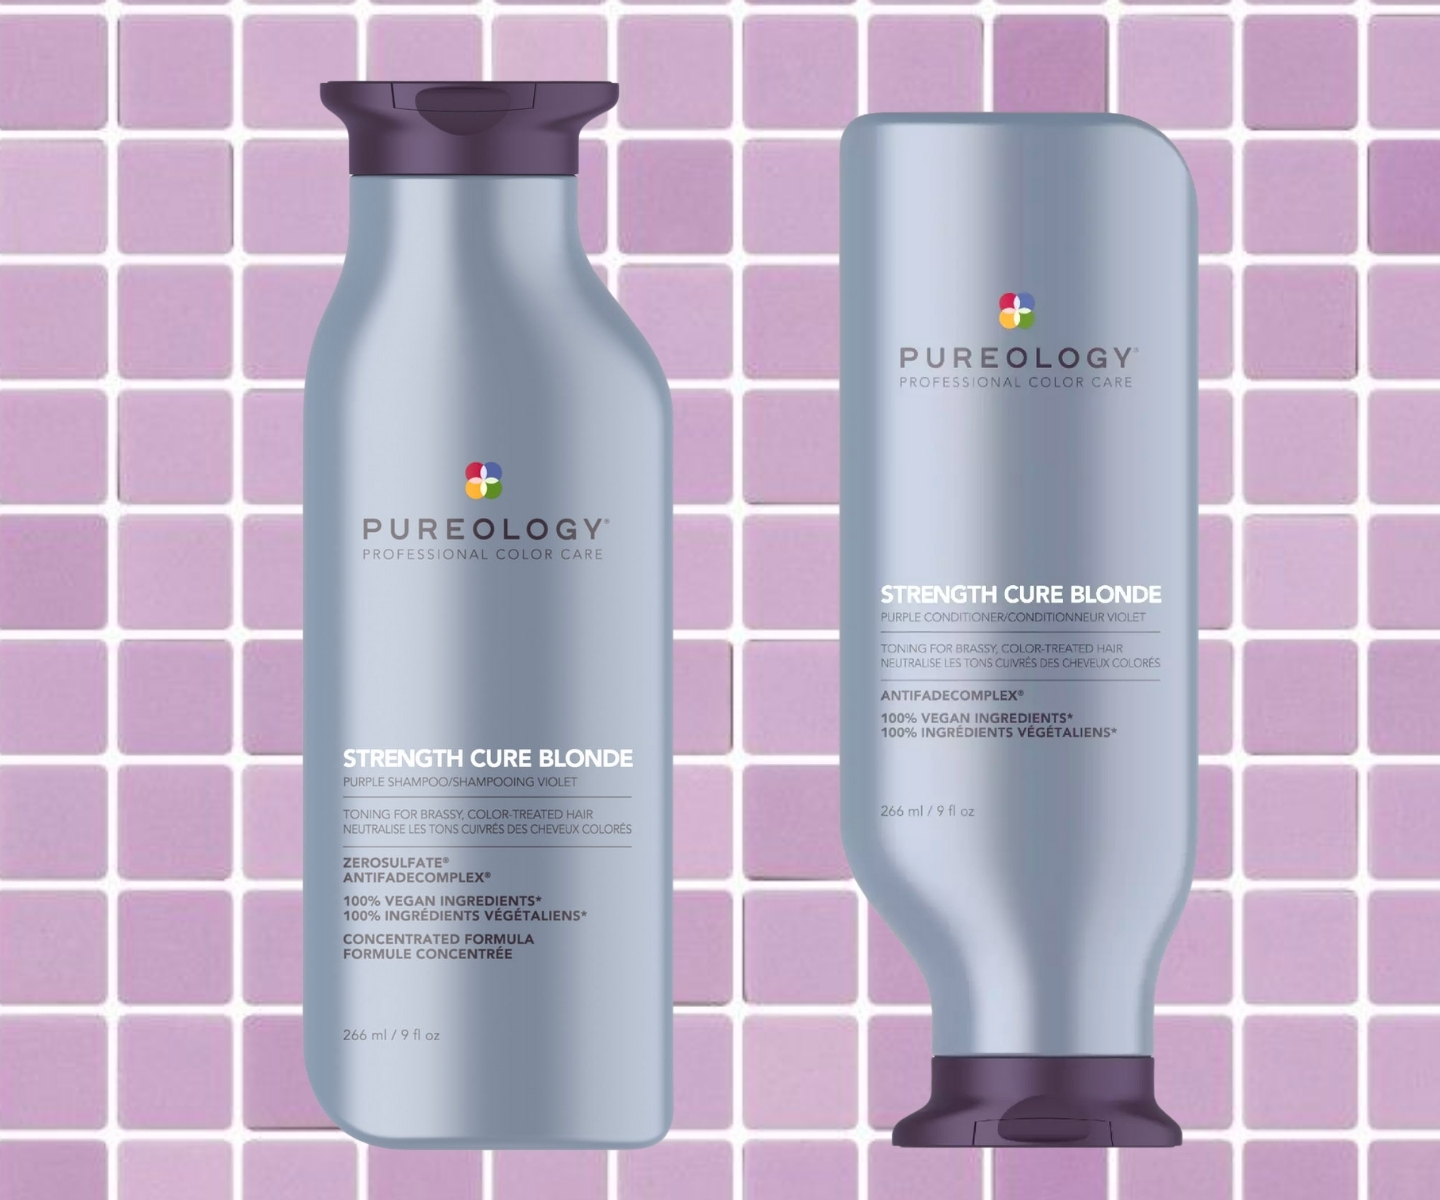 Pureology Strength Cure Blonde Shampoo & Conditioner